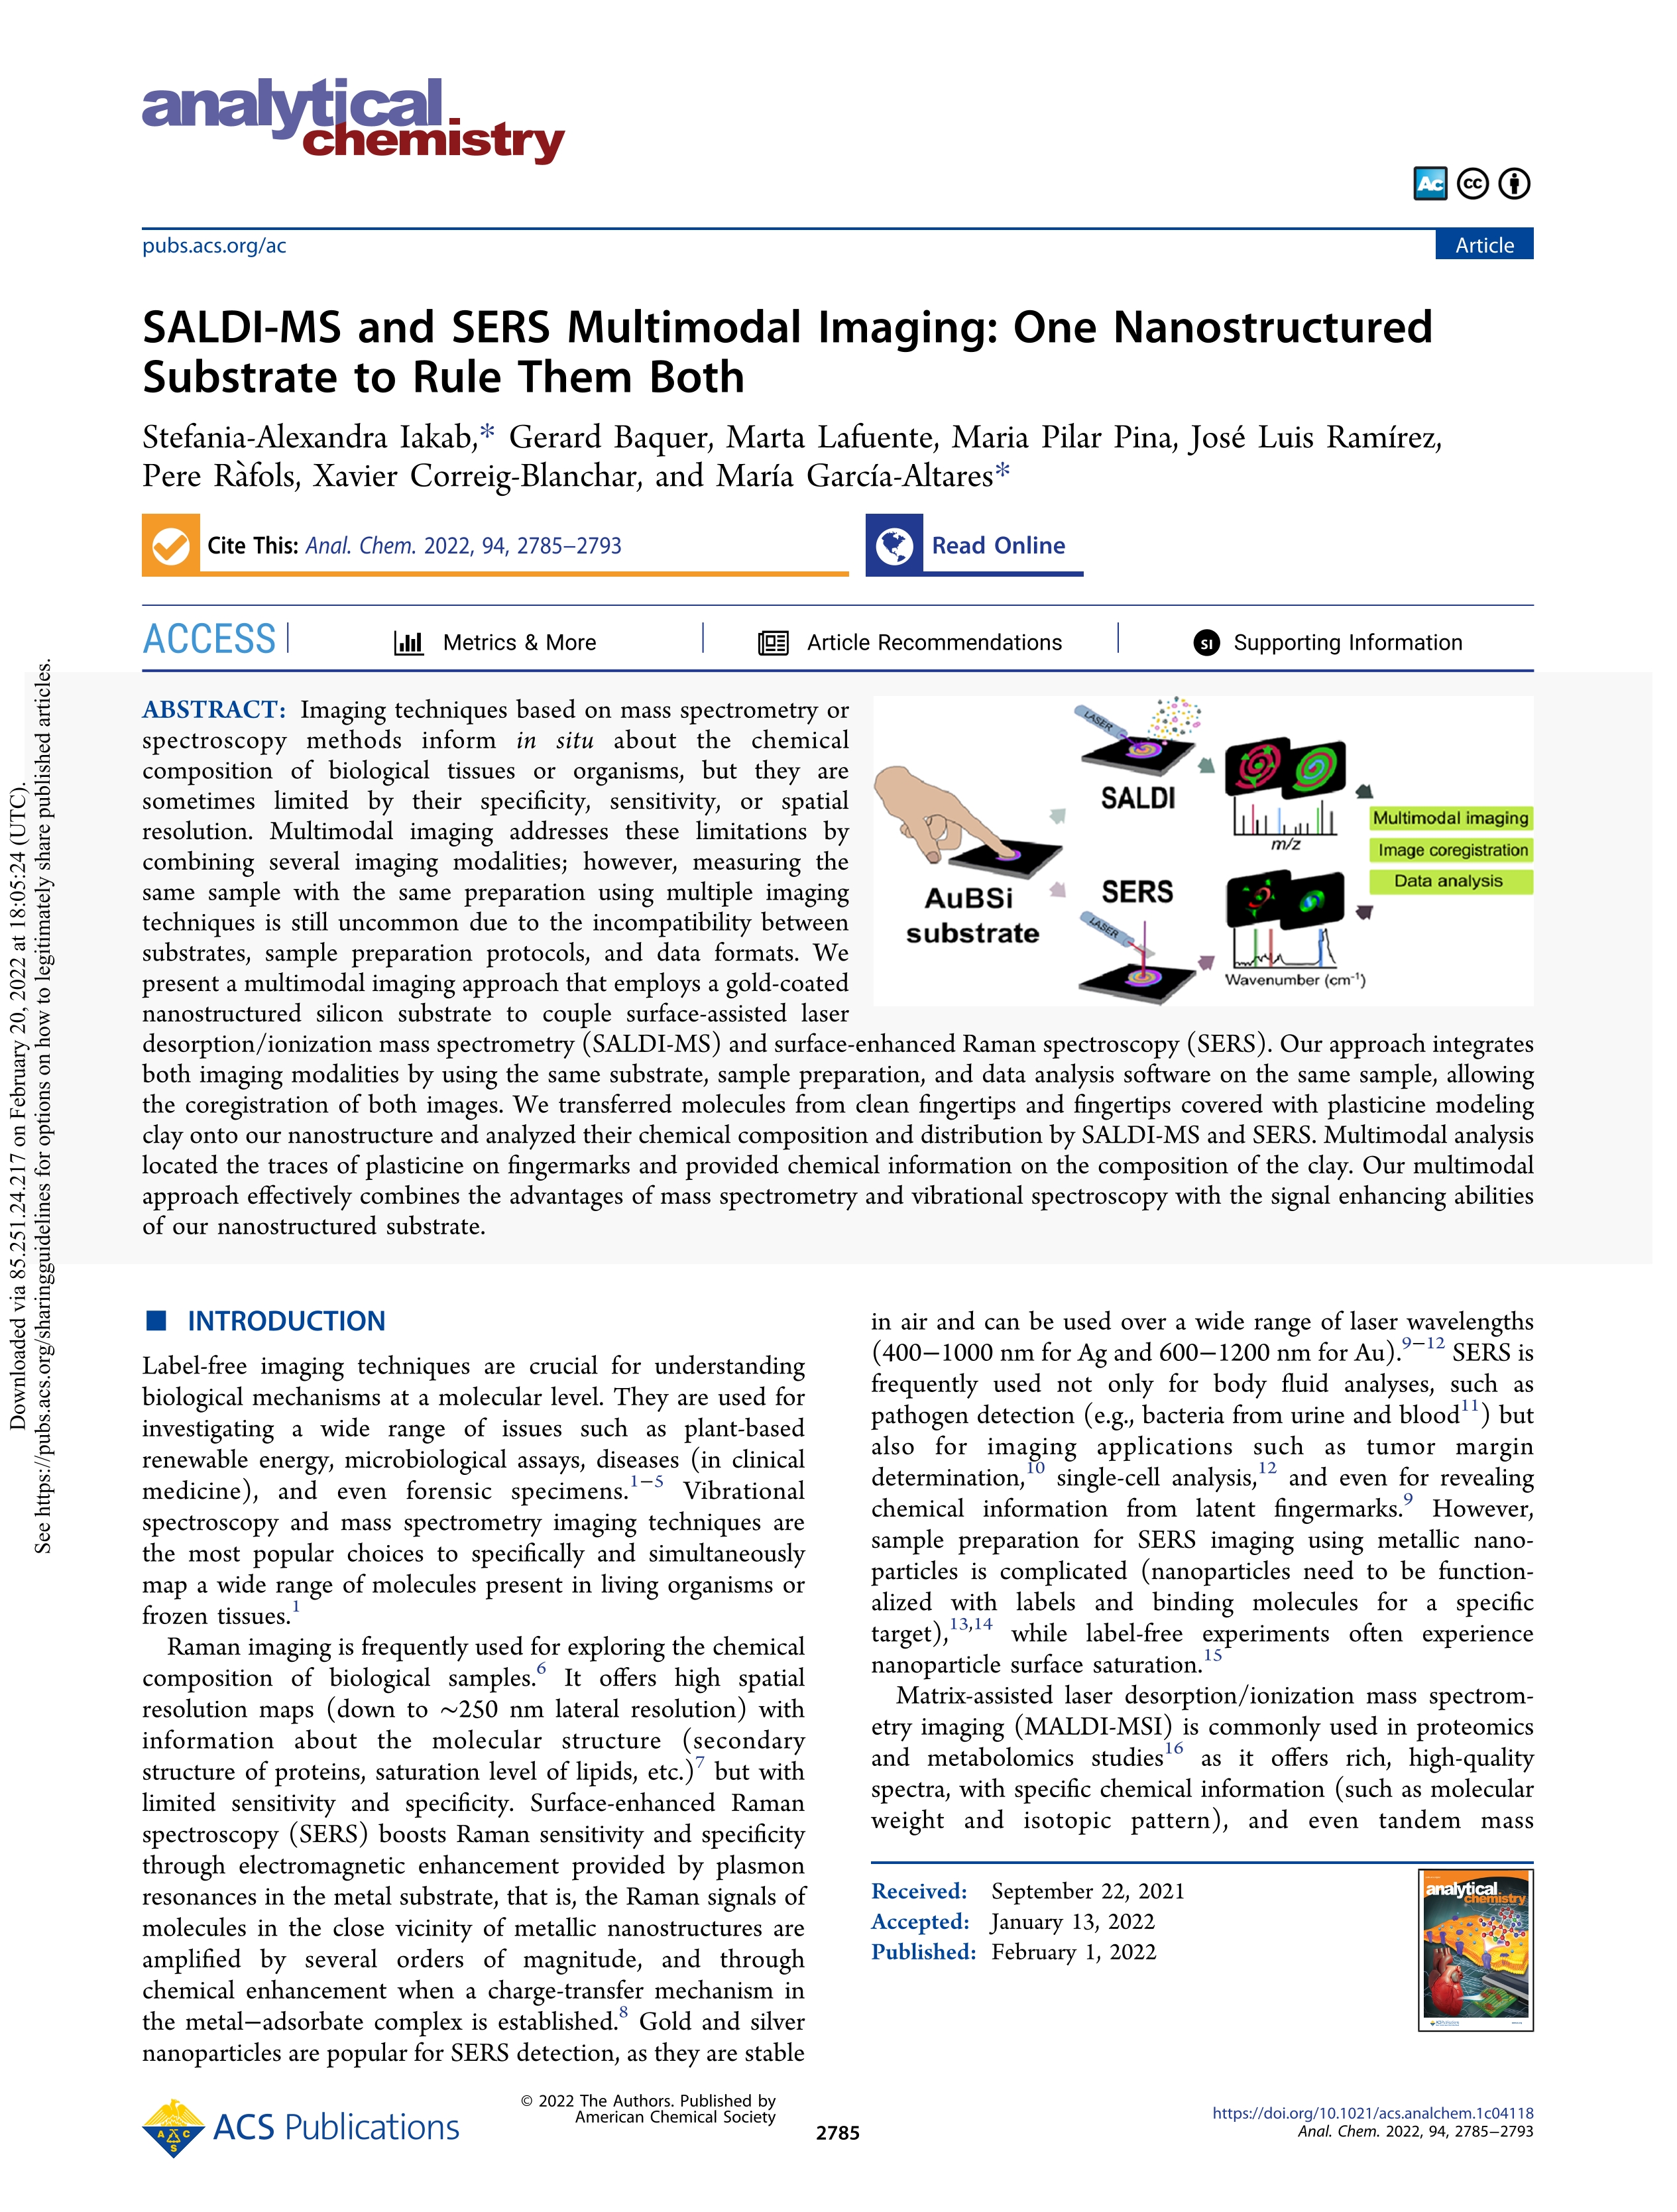 SALDI-MS and SERS Multimodal Imaging: One Nanostructured Substrate to Rule Them Both